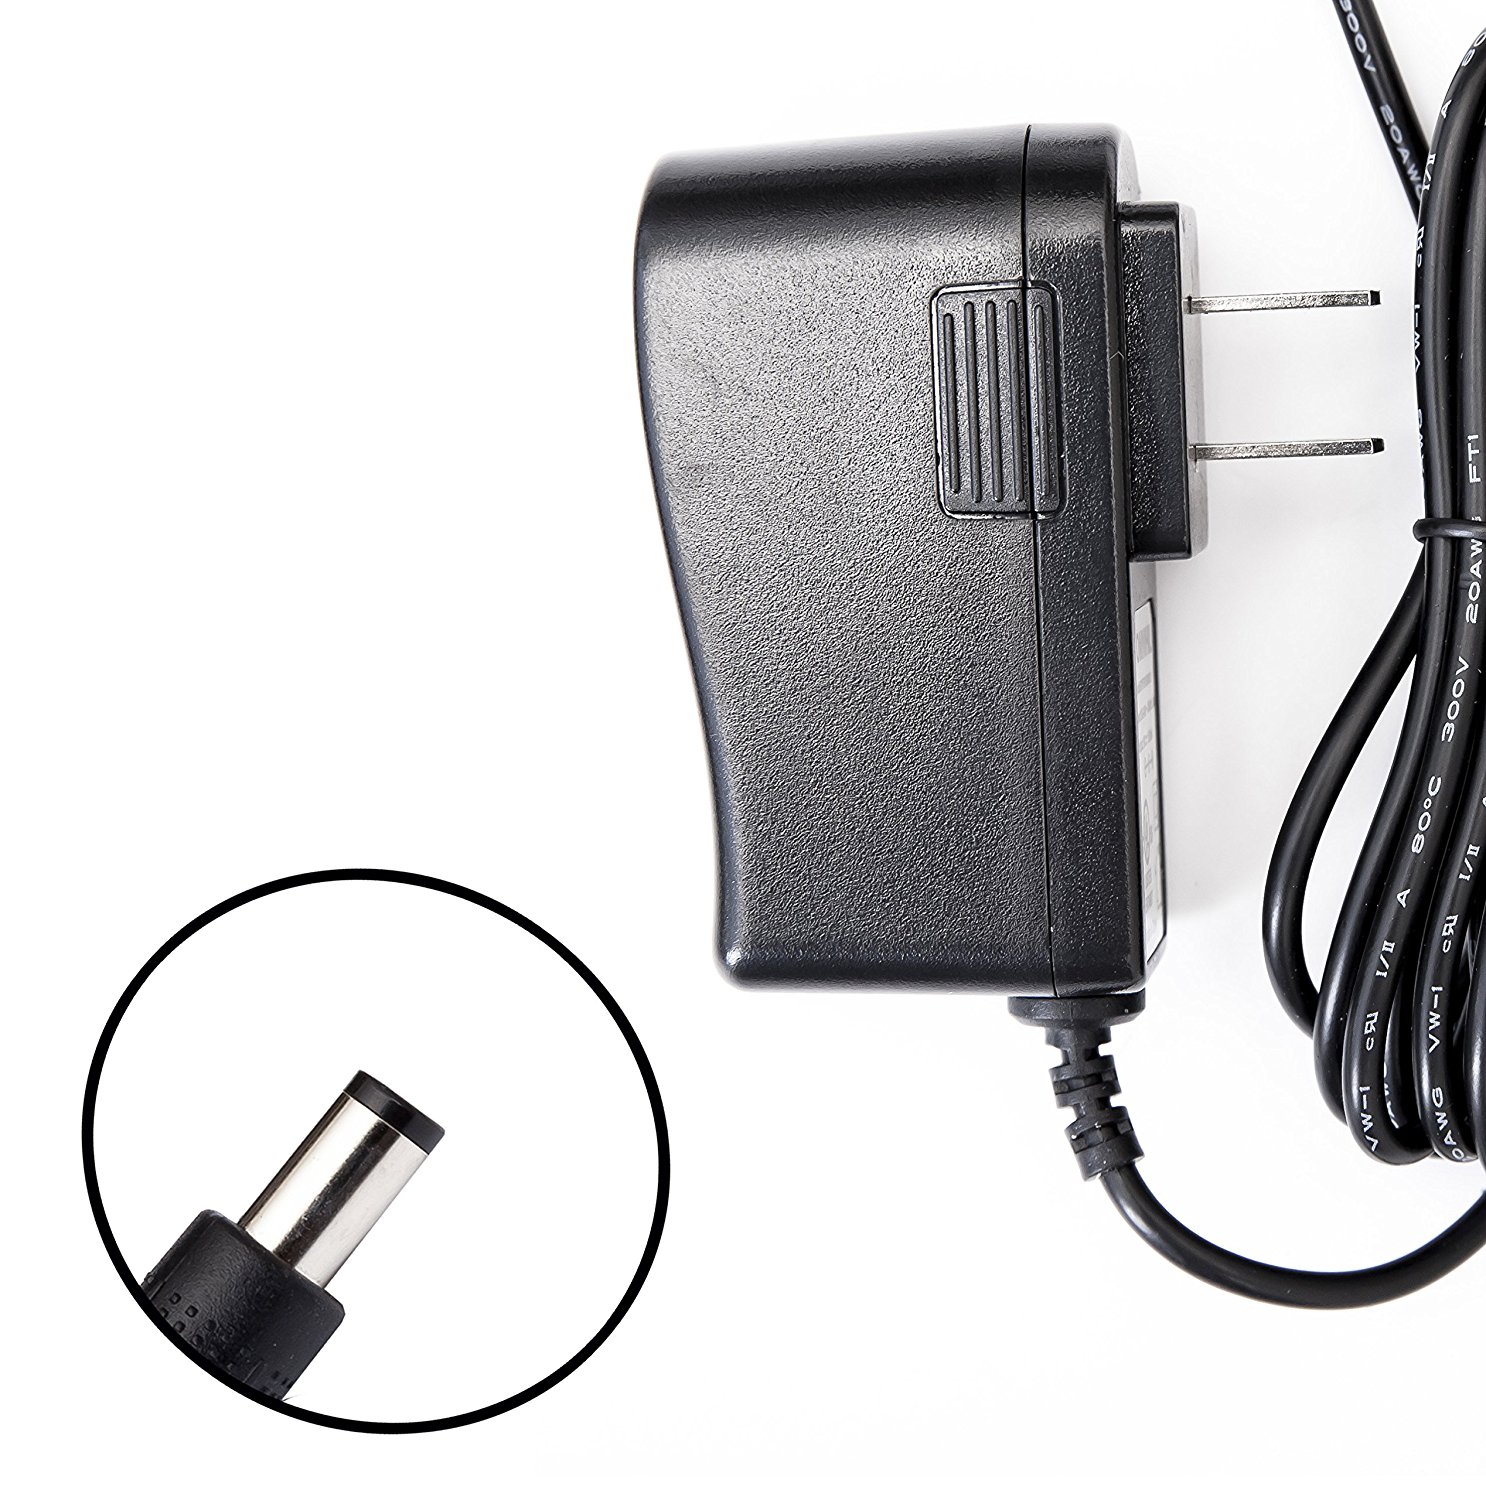 OMNIHIL AC/DC Power Adapter/Adaptor for DC 9V OMNIHIL AC/DC/DC OMNIHIL AC/DC Power Adapter/Adaptor Power for BOSS PSA-120 Replacement Switching Power Supply Cord Cable PS Wall Home Charger Mains PSU - image 2 of 4